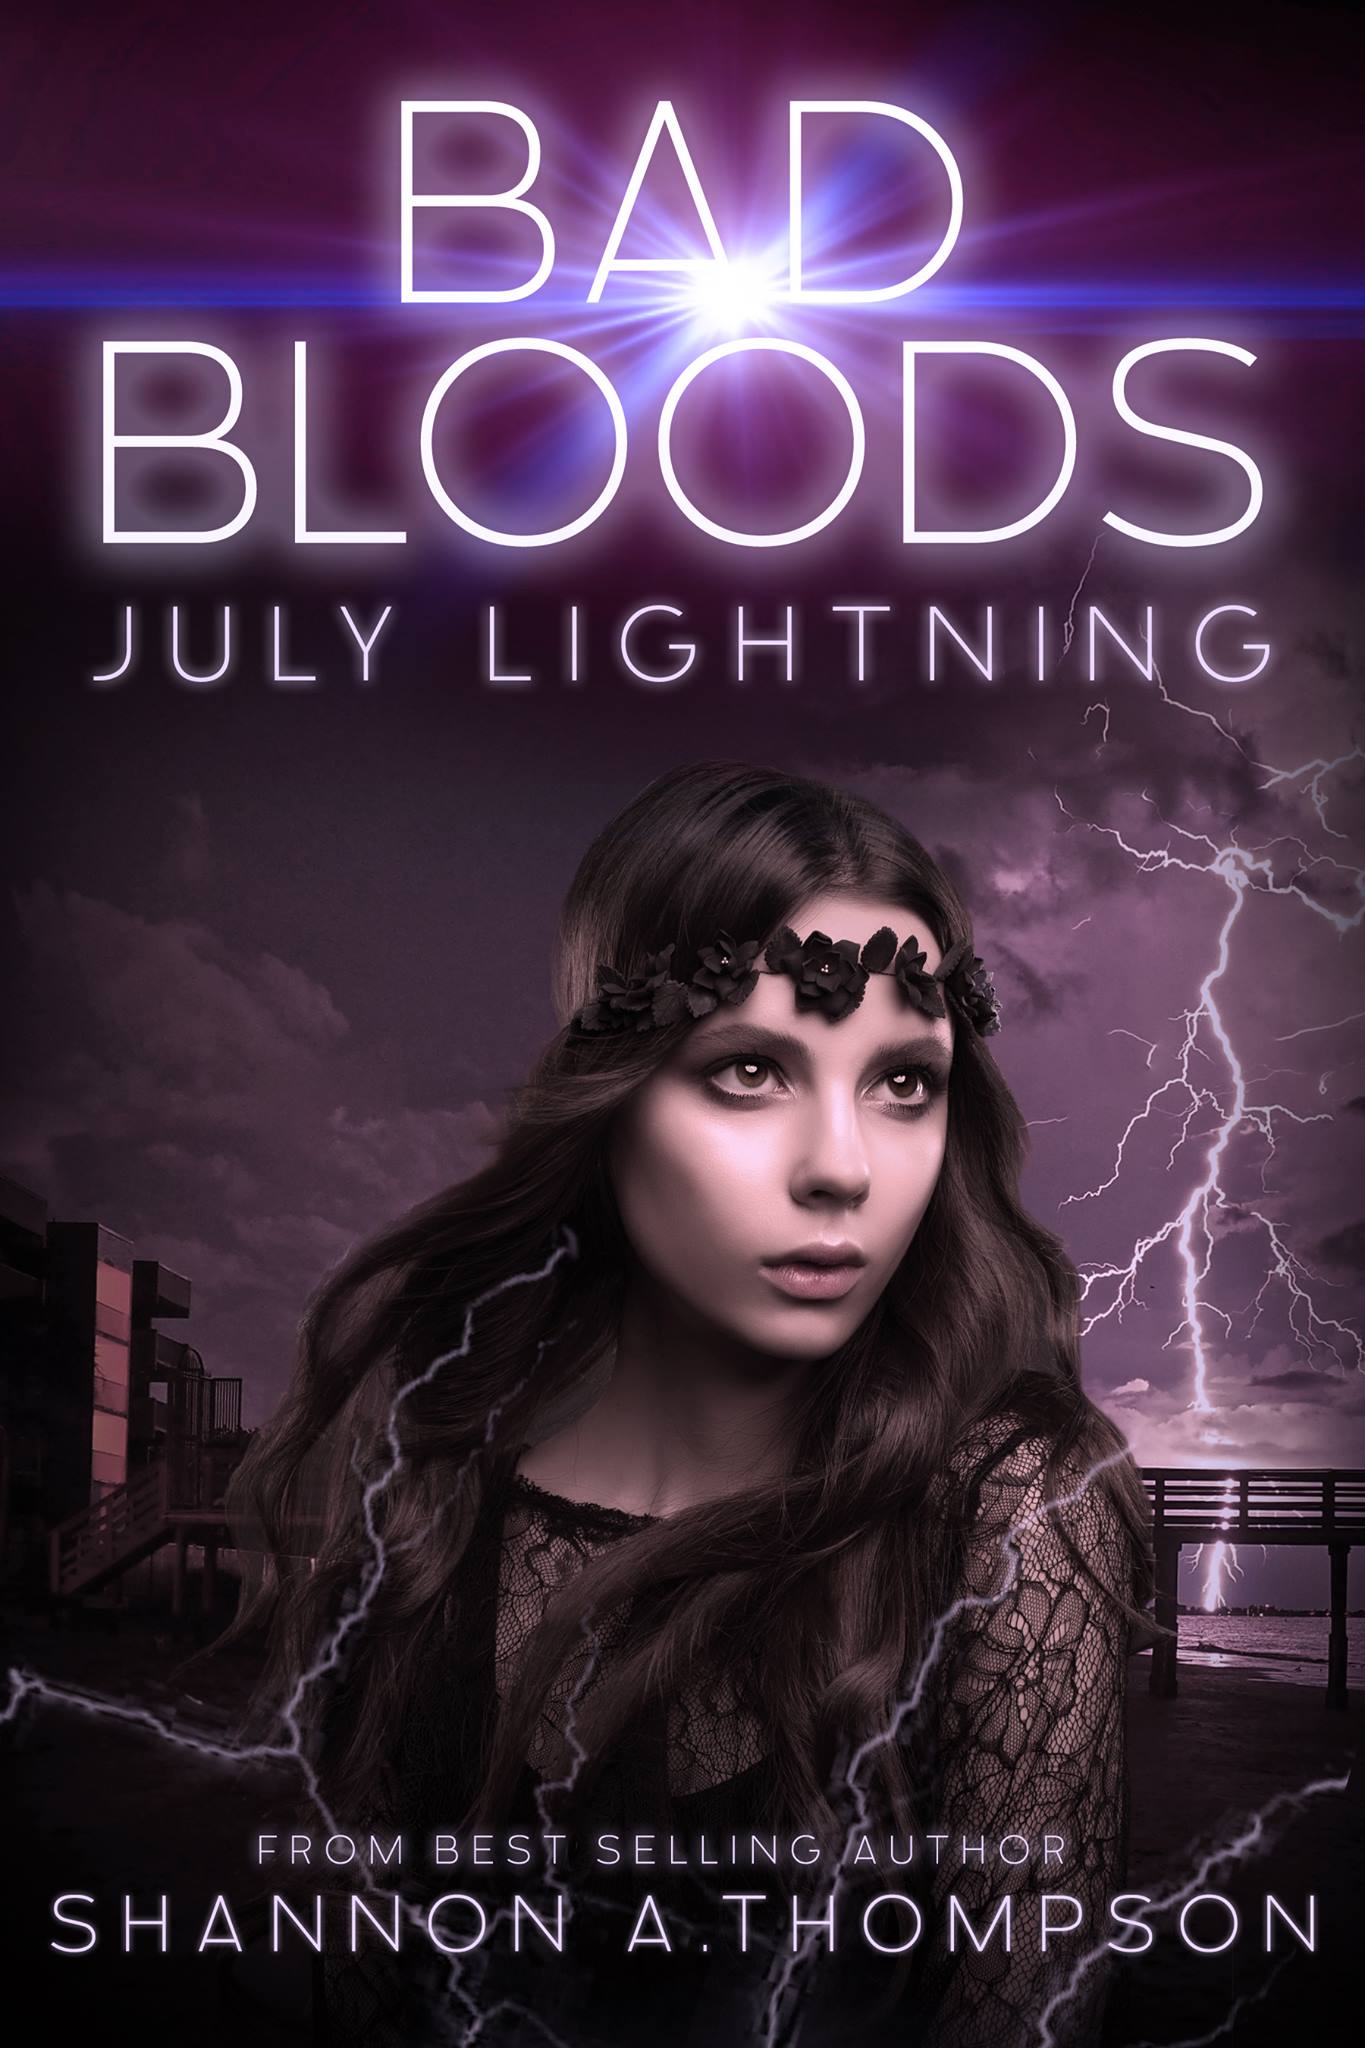 Bad Bloods: July Lightning by Shannon A Thompson